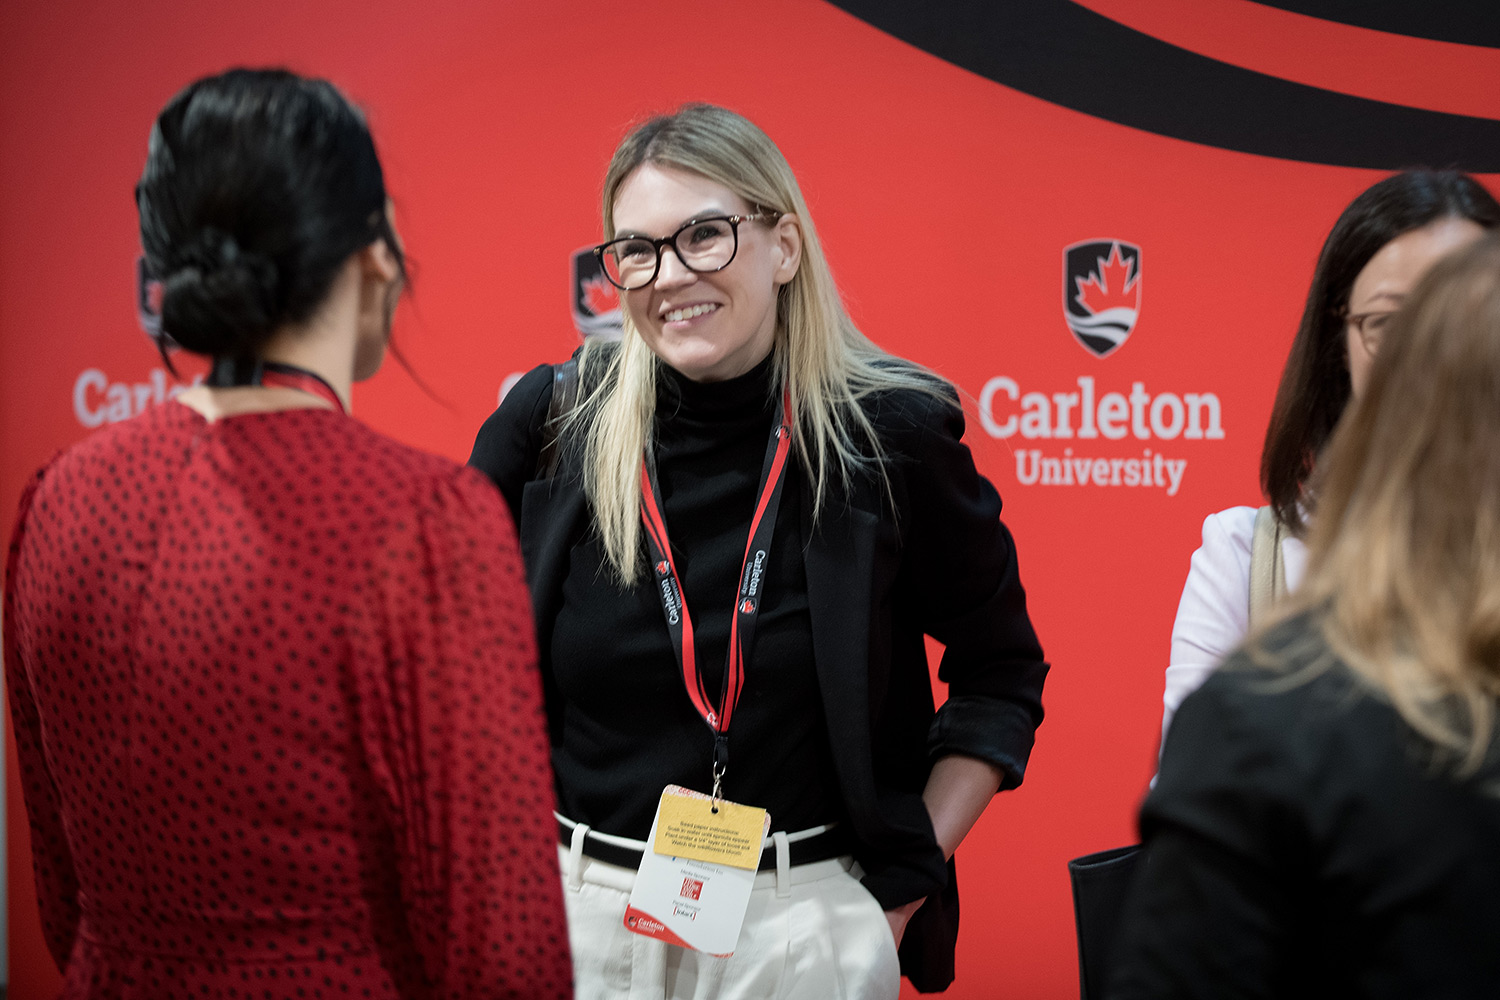 4 people engaging in conversations in front of a red promotional backdrop featuring the Carleton University logo.